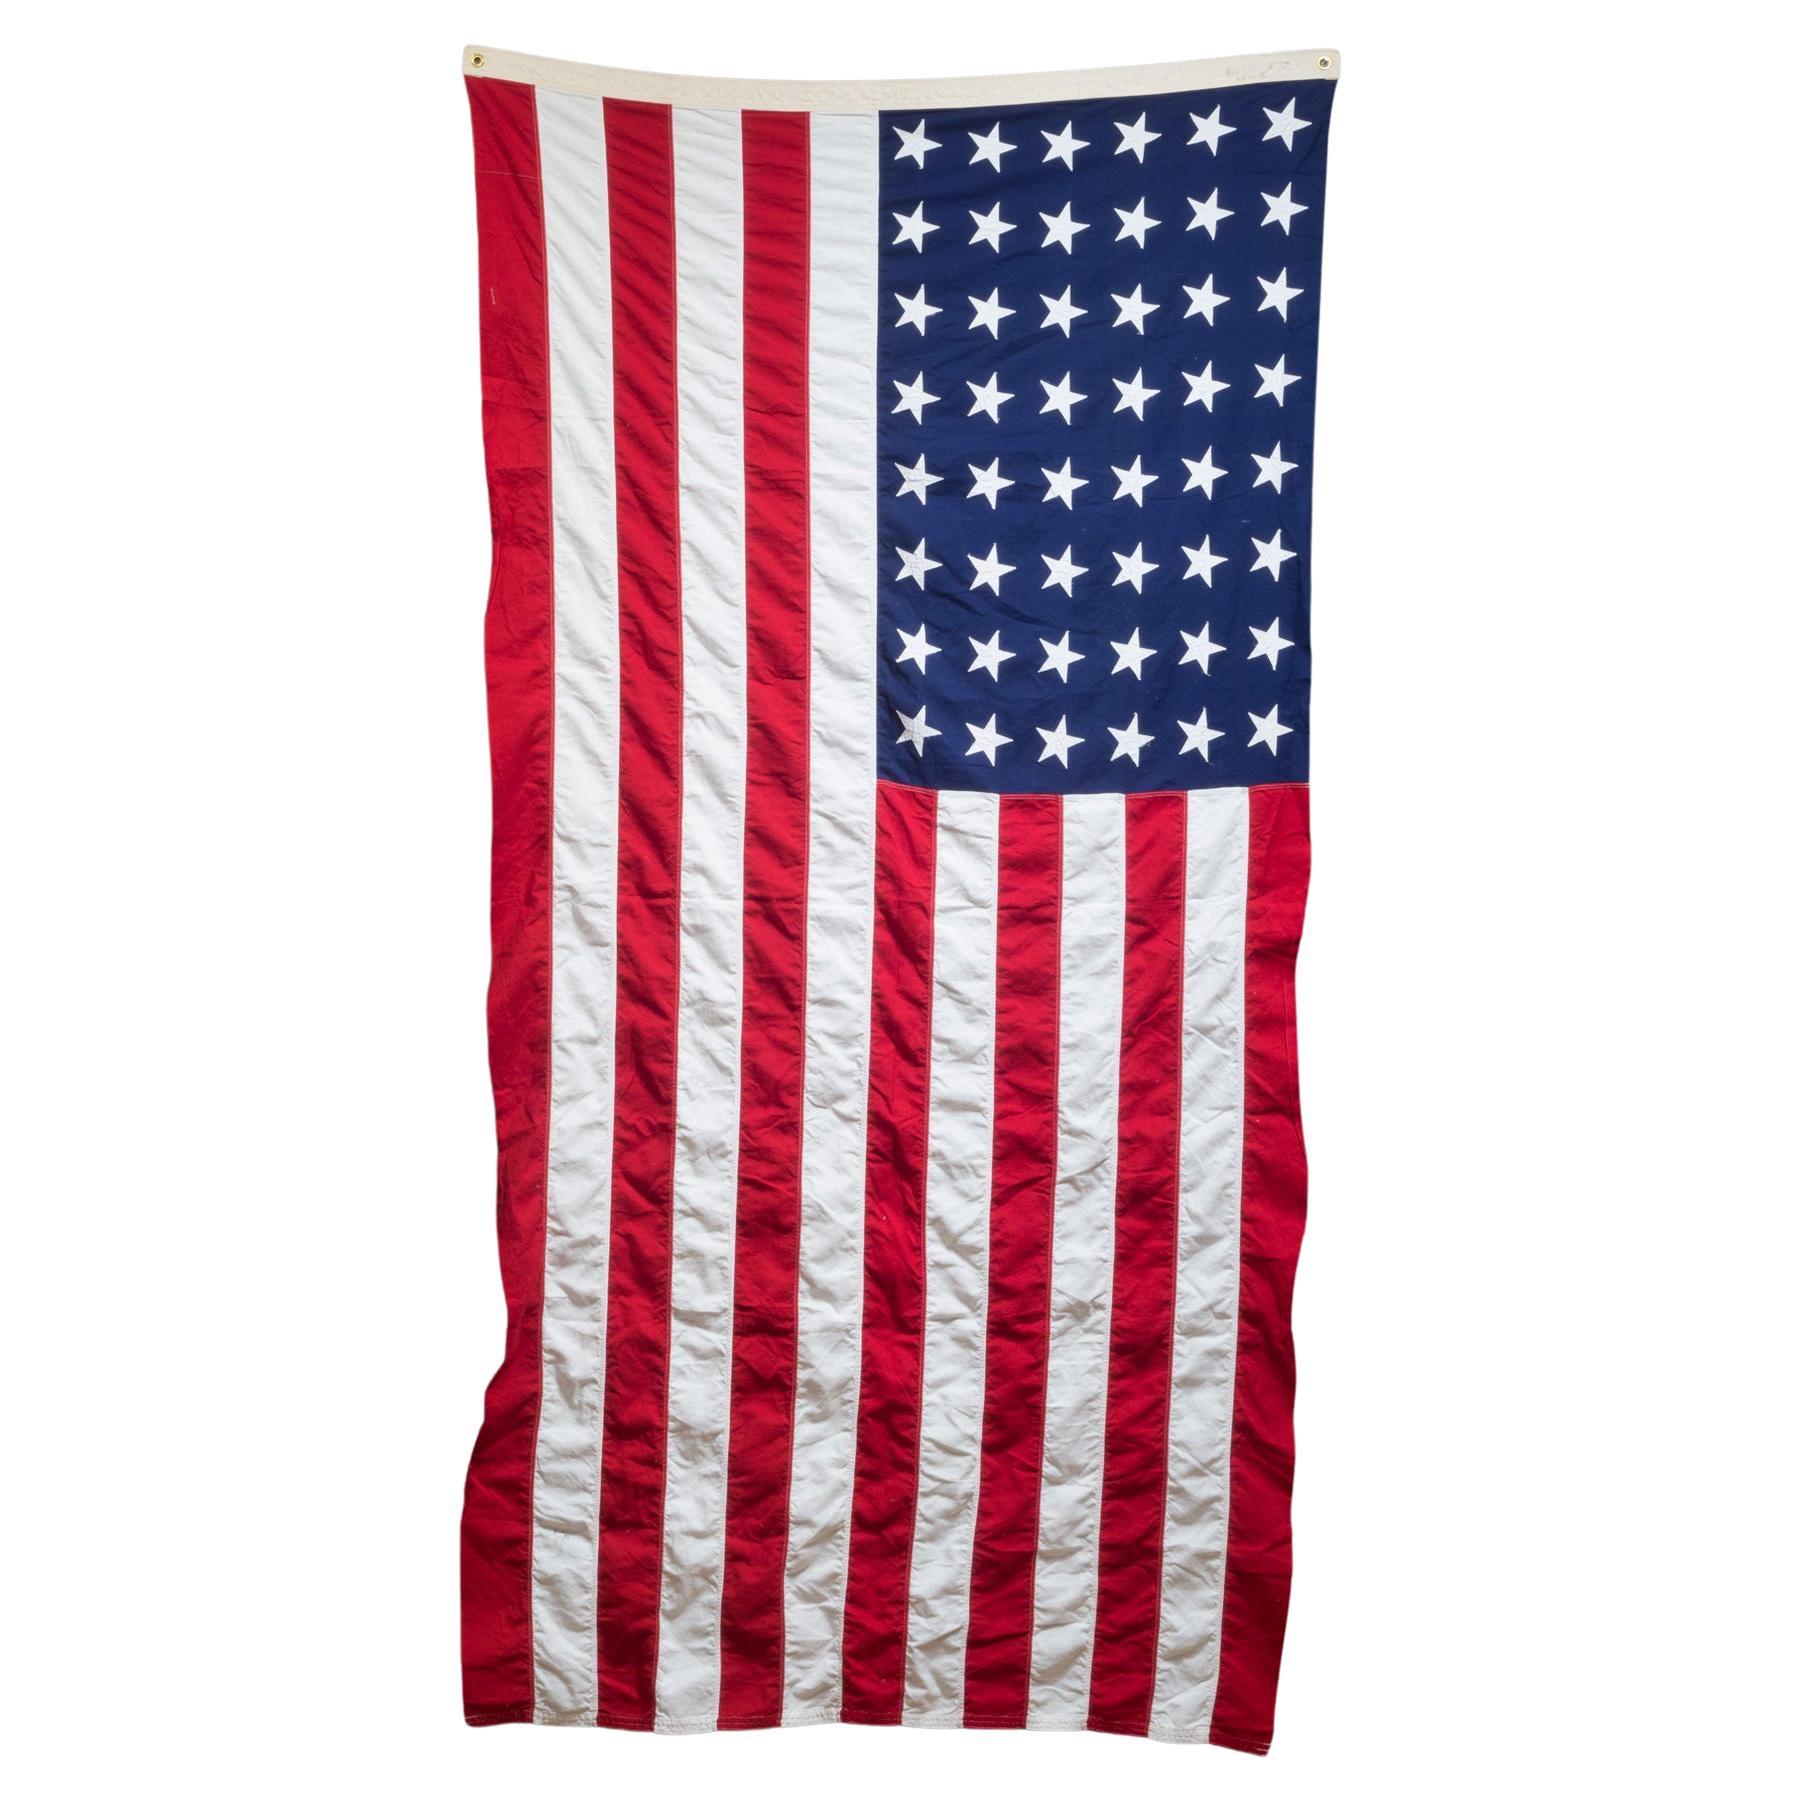 Early 20th c. Monumental American Flag with 48 Stars, c.1940-1950